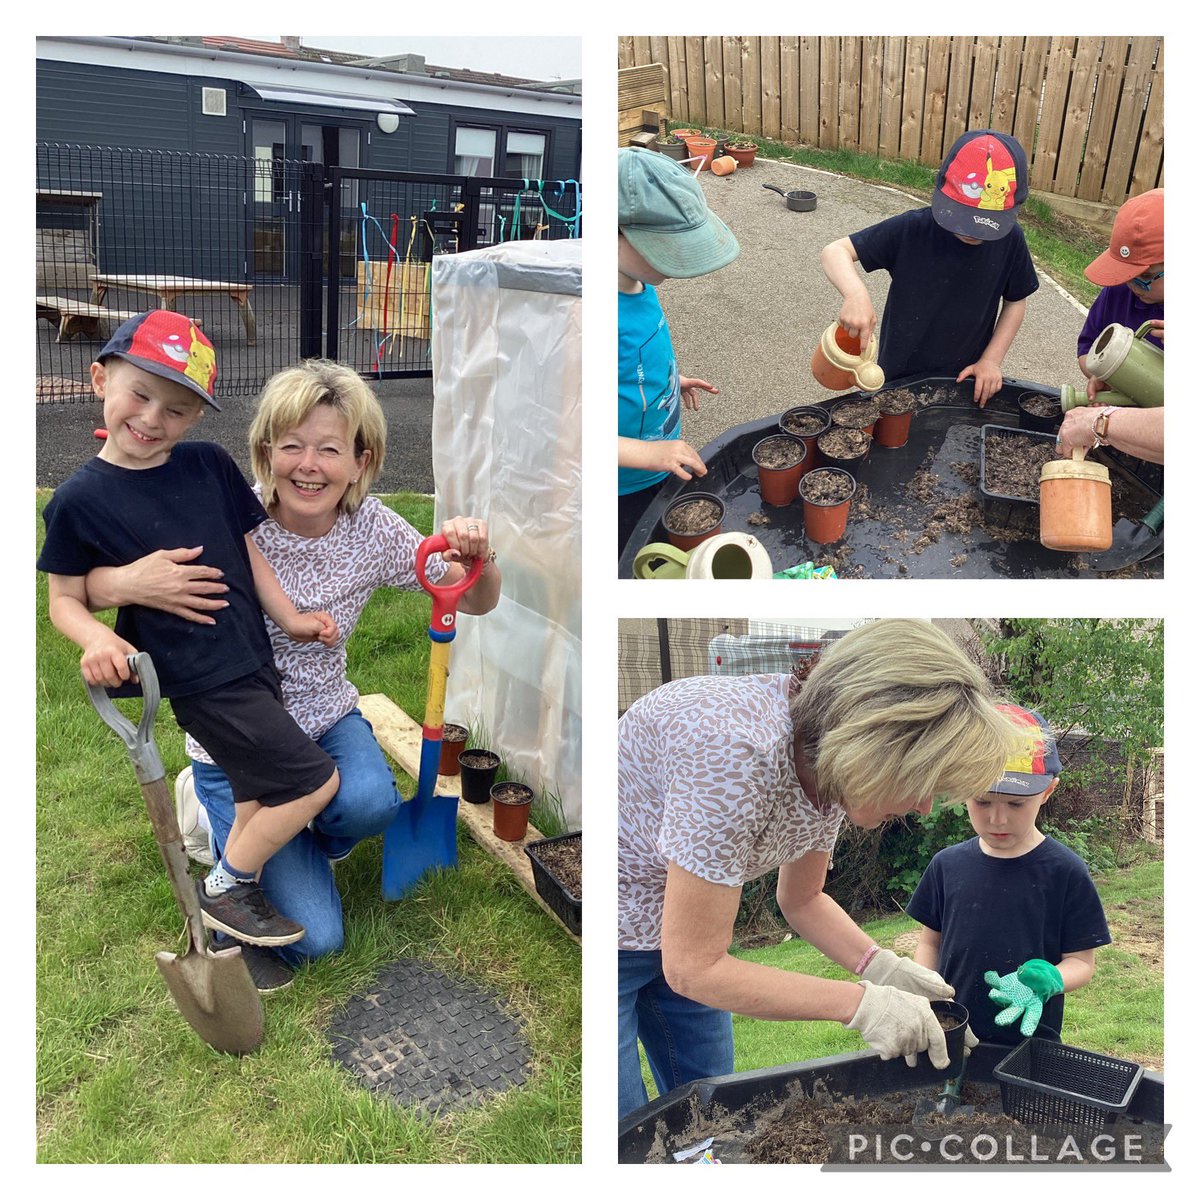 Thanks to L’s Nana for joining us for Stay and garden, we planted pumpkins, courgettes and pansies. Discussing what plants need to grow “Why do they need water?” asked L. We’re looking forward to watching them grow 🌱#engagingwithnature #familylearning